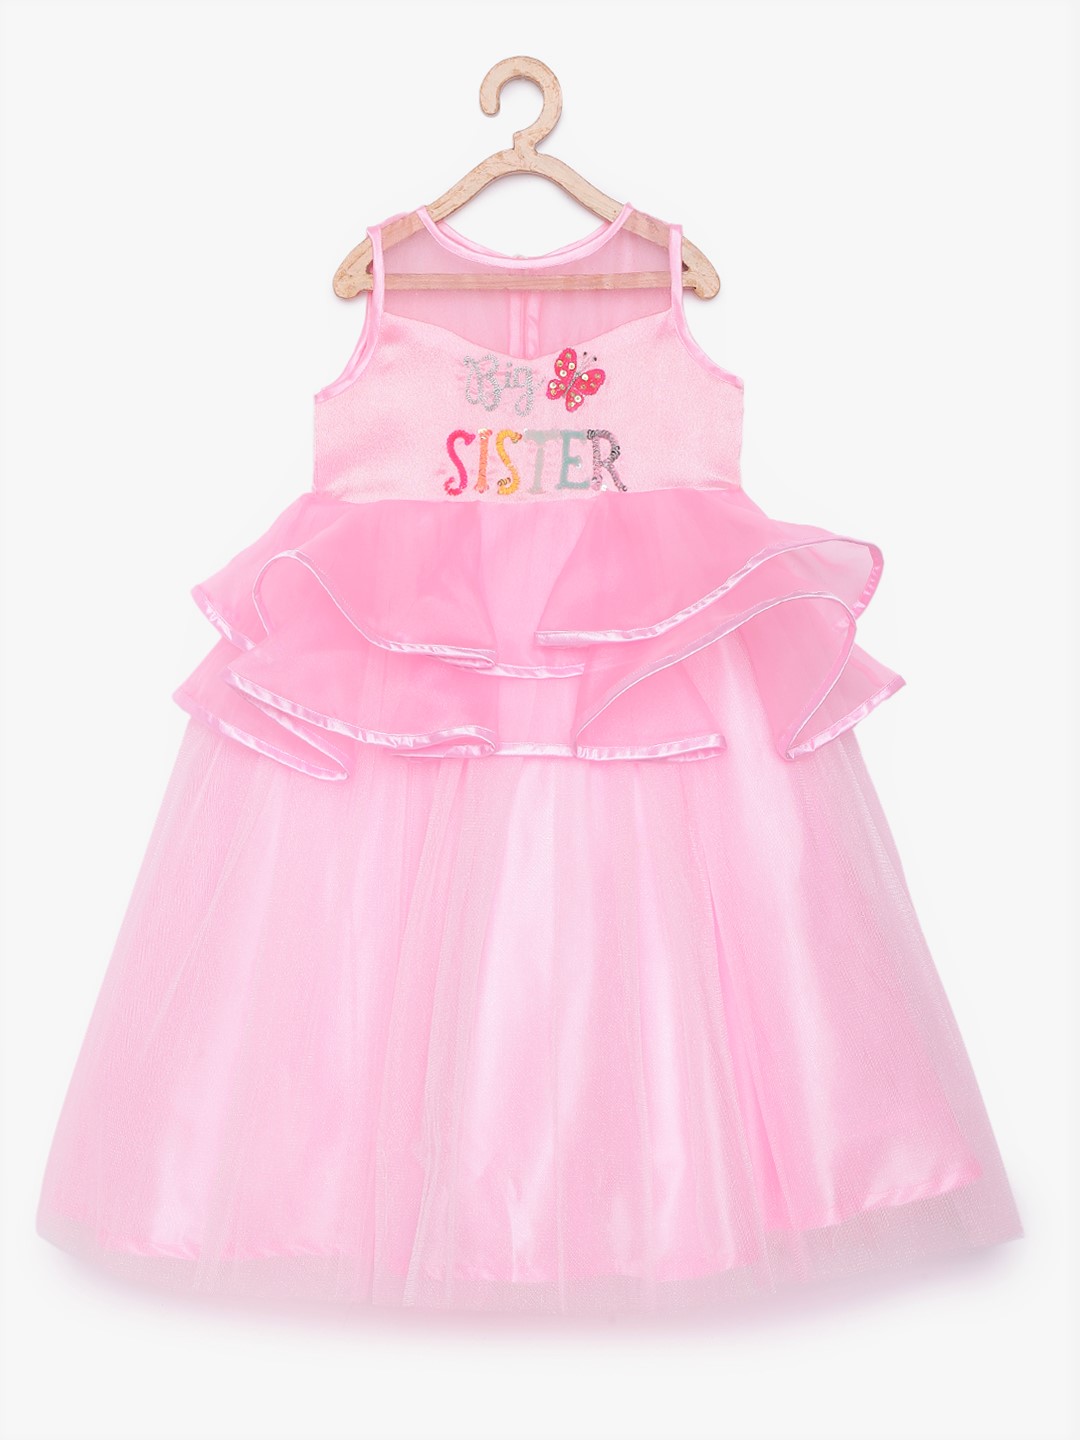 1 15 Big Sister Ruffle Gown - Pink